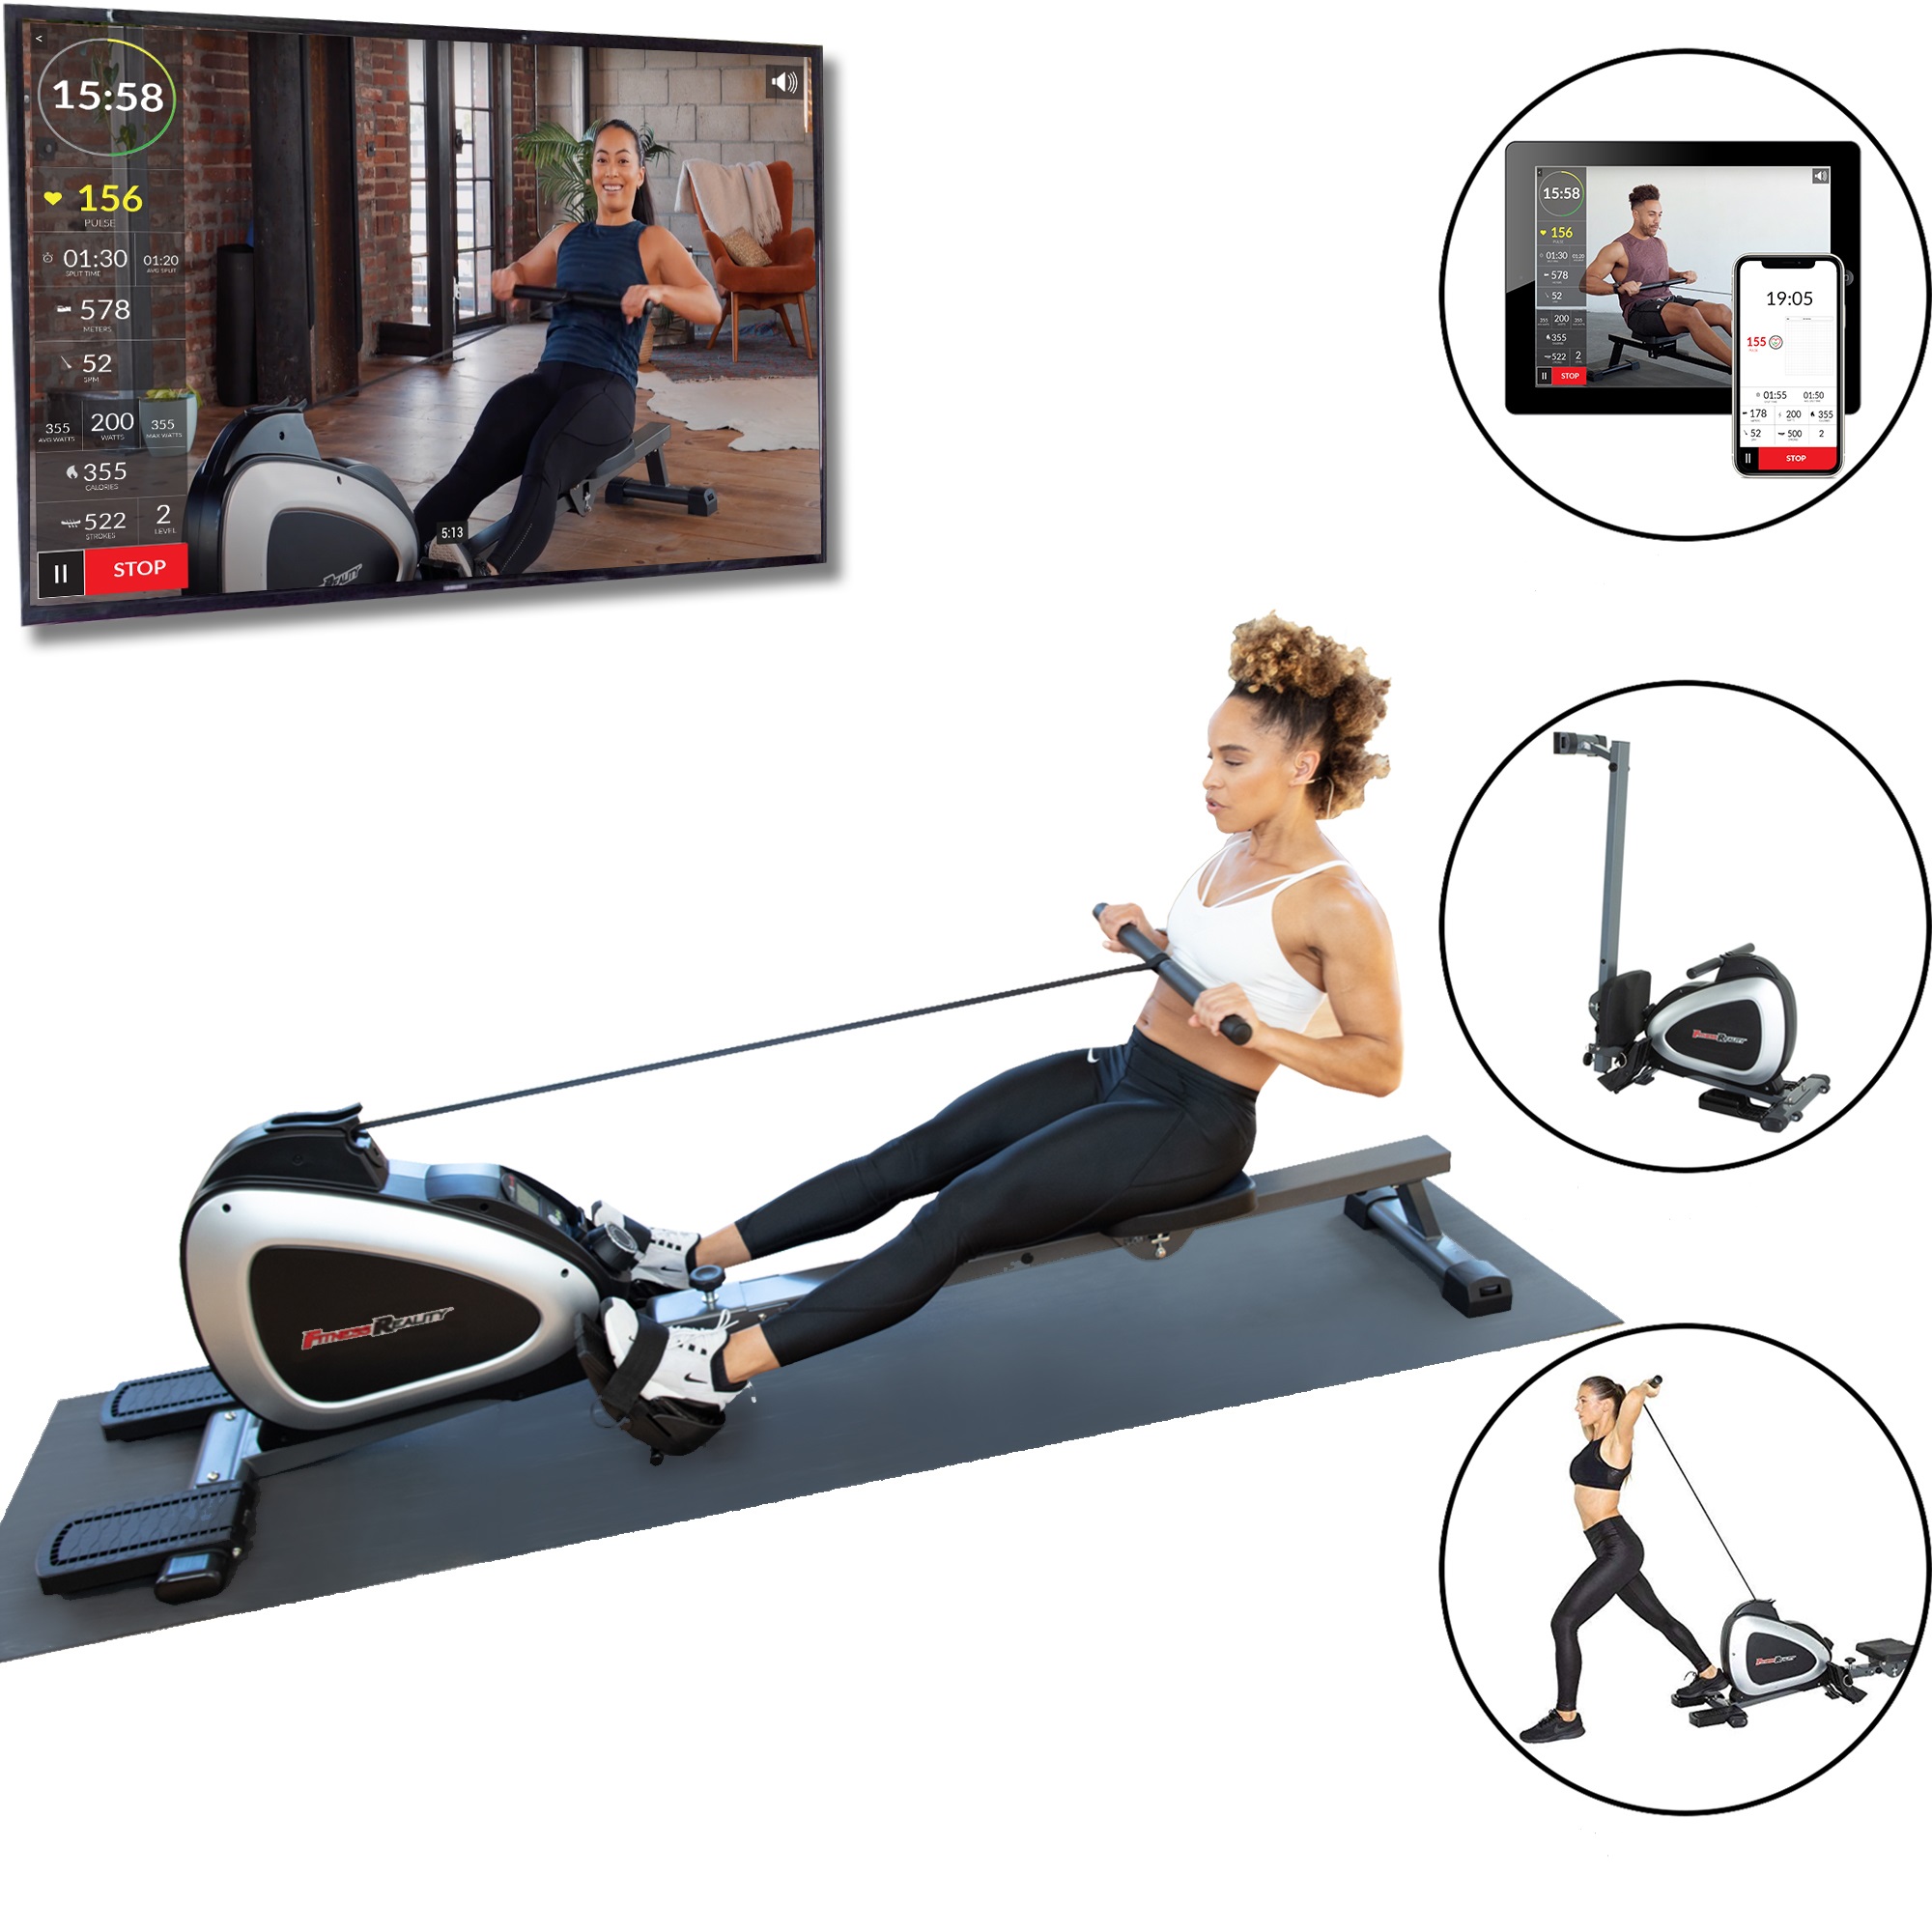 Fitness Reality 1000 PLUS Bluetooth Magnetic Rowing Machine Rower with Extended Optional Full Body Exercises and 14 Resistance Levels - image 4 of 12